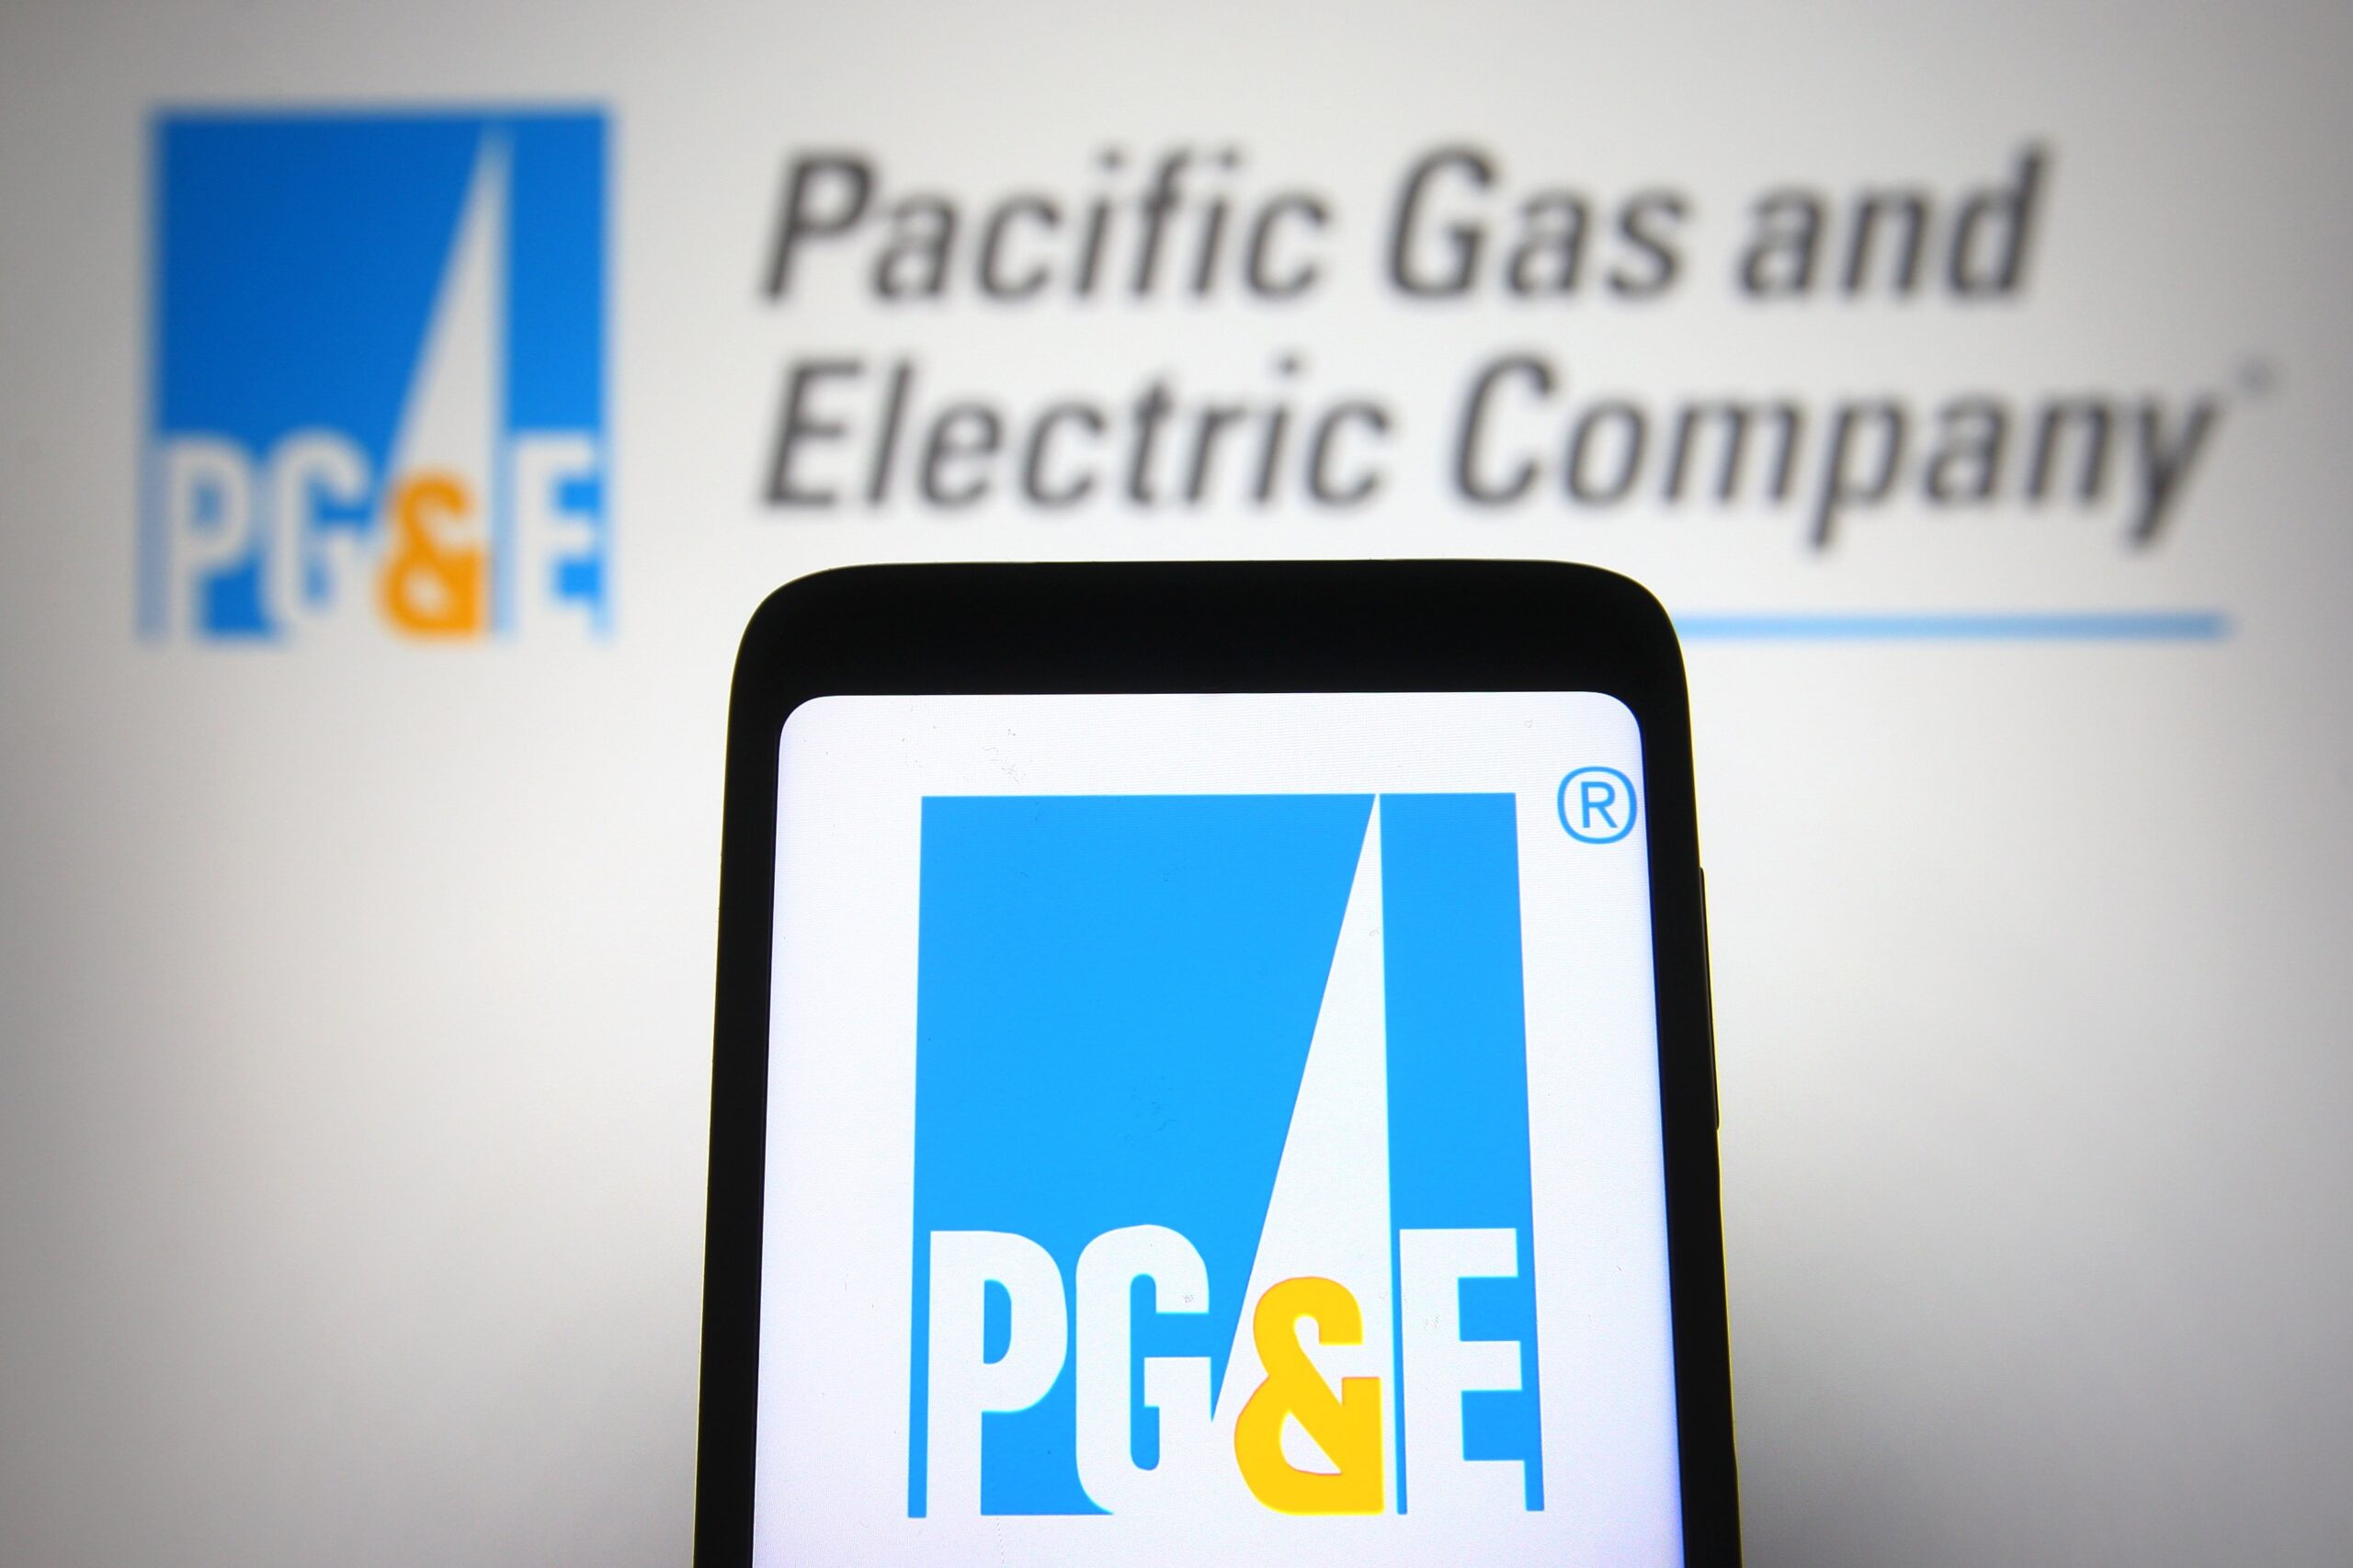 In this photo illustration, the Pacific Gas and Electric Company (PG&E) logo is seen on a smartphone and a pc screen.